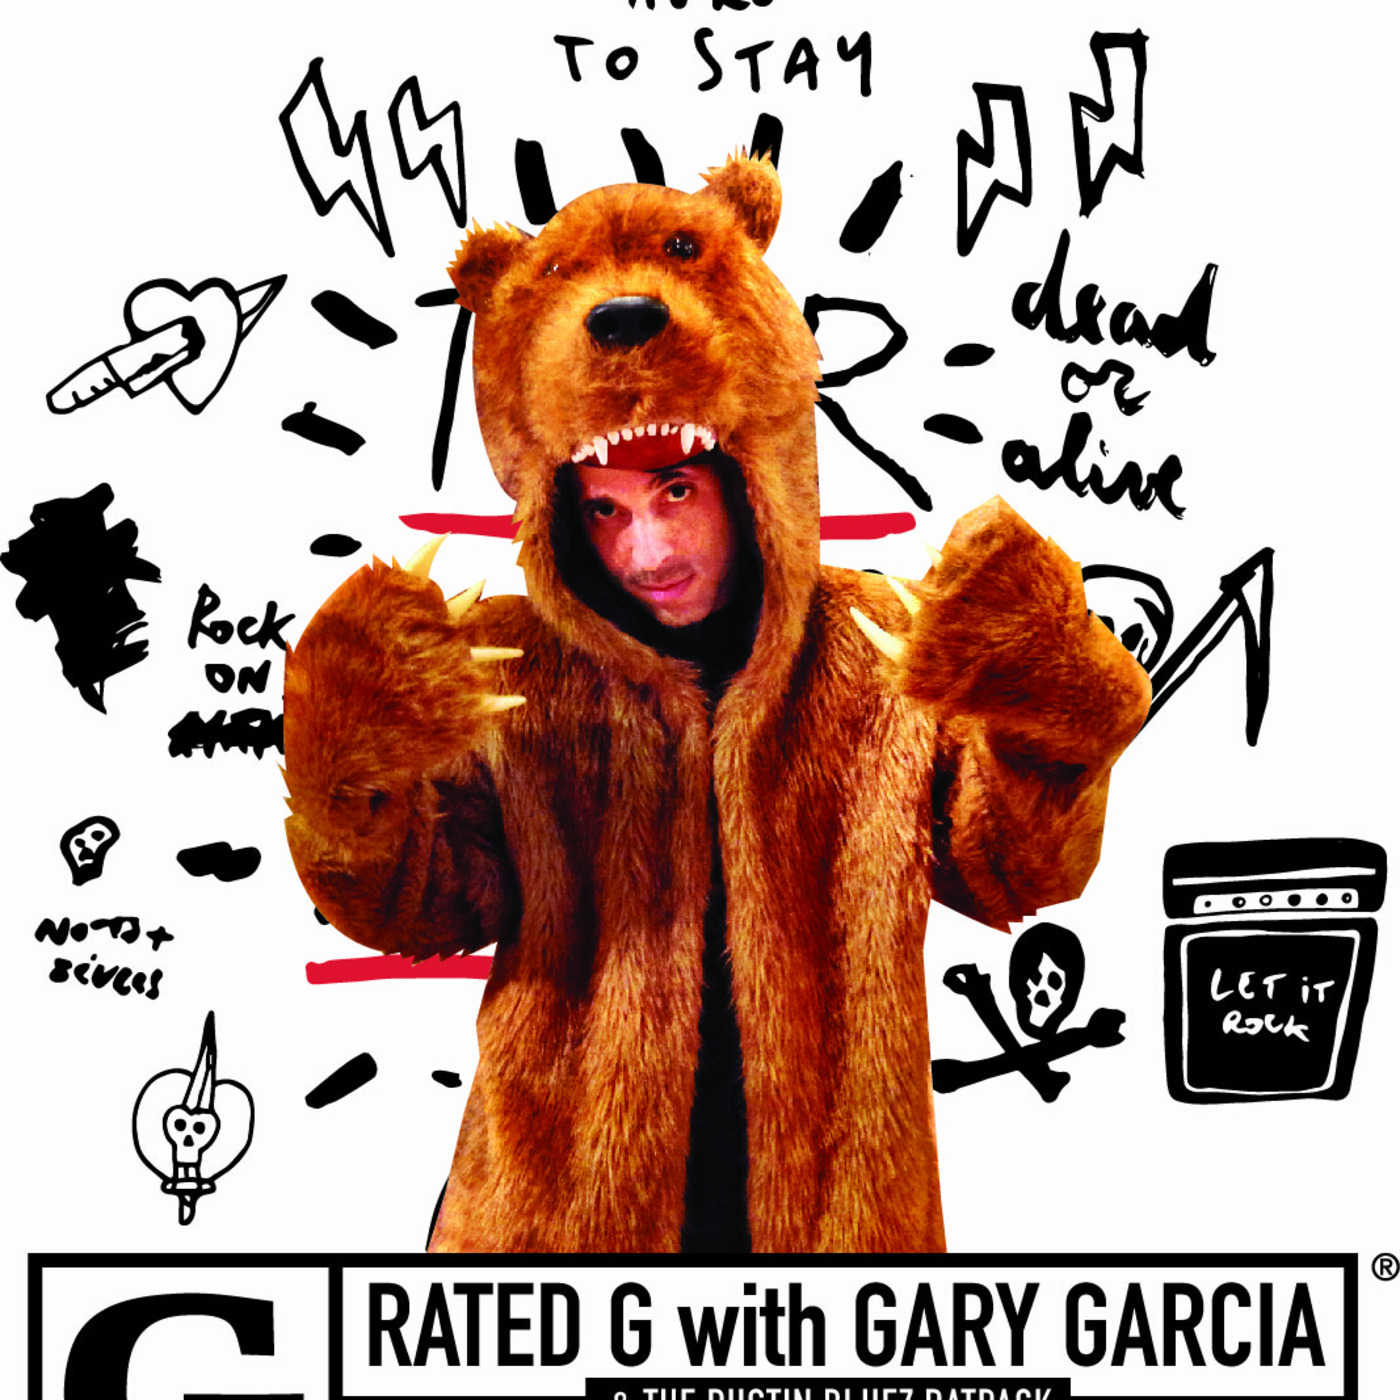 Rated G with Gary Garcia and the Rustin Bluez Rat Pack